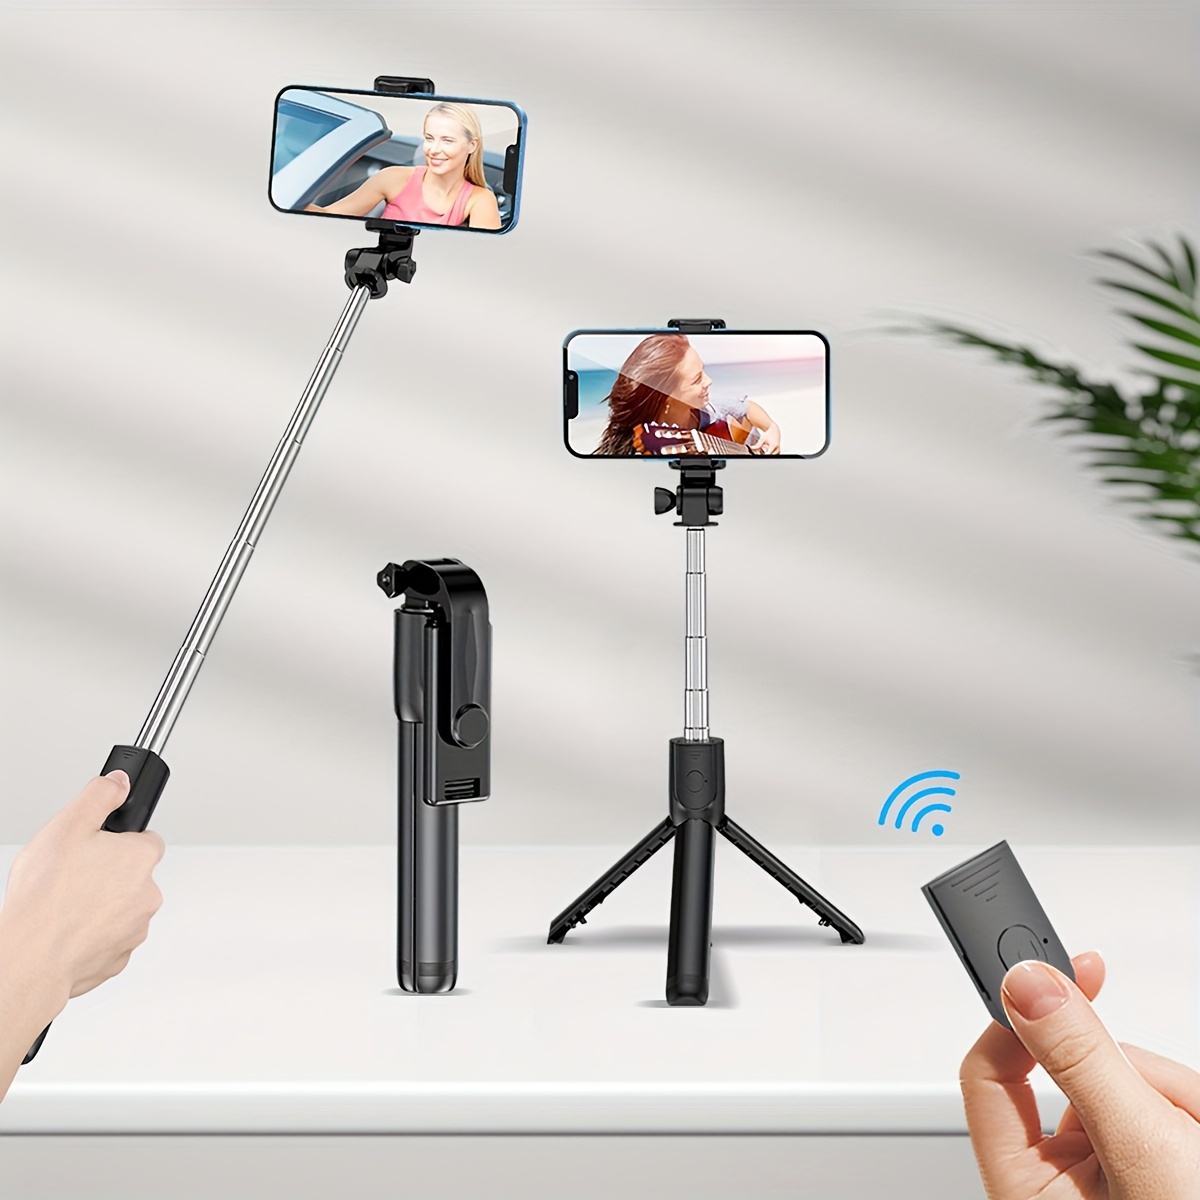 

Wireless Bracket Mobile Phone Bracket Tripod Support Bracket Floor-standing Triangular Fixed Shooting Photo Video Special Self-timer Pole Portable Multi-functional Outdoor